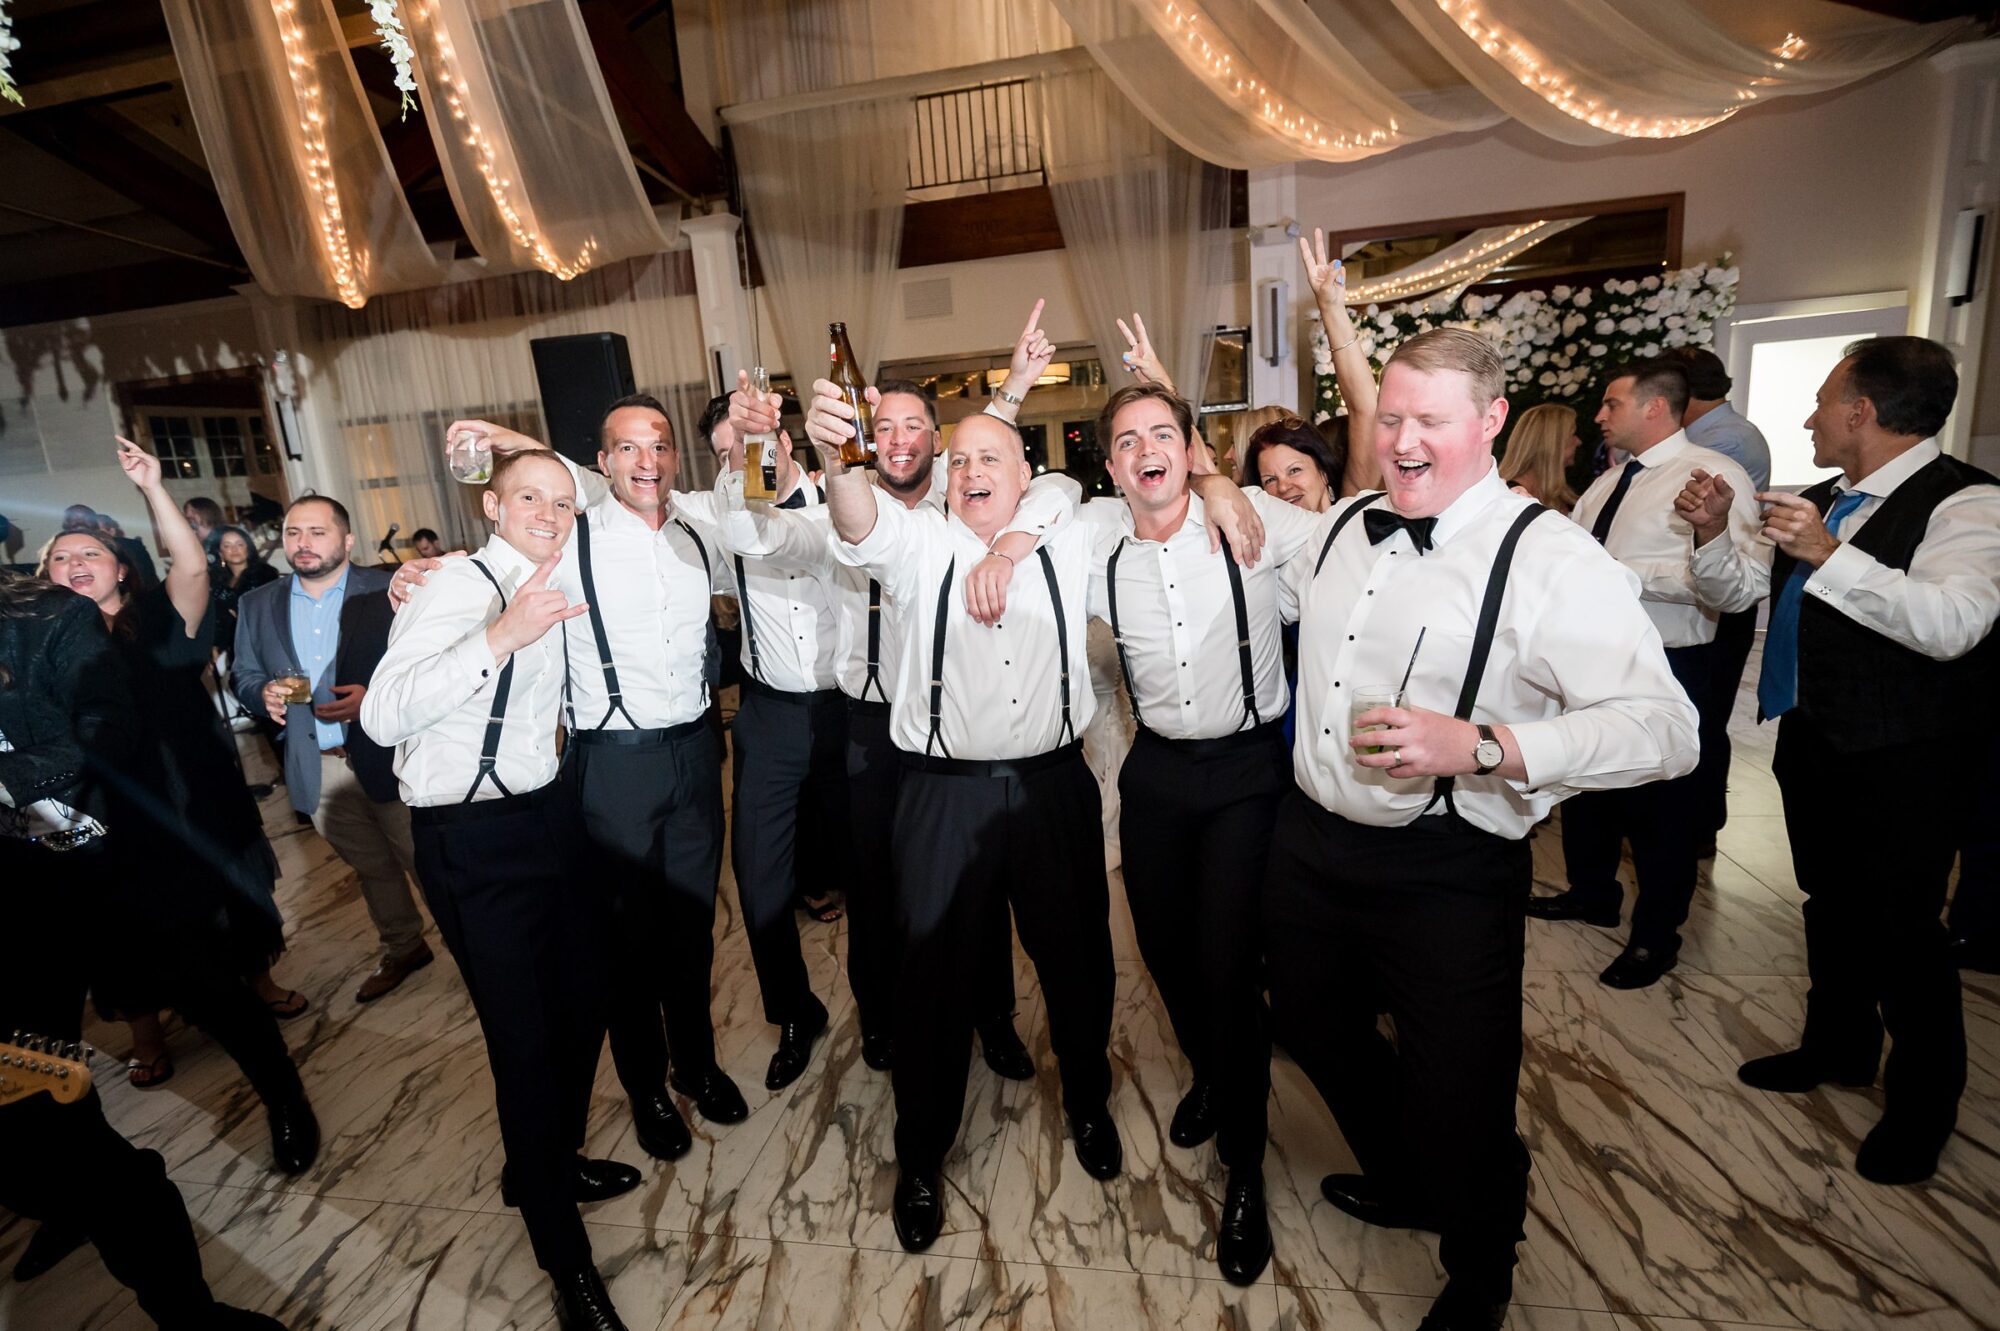 A group of men in tuxedos dancing at a wedding reception.